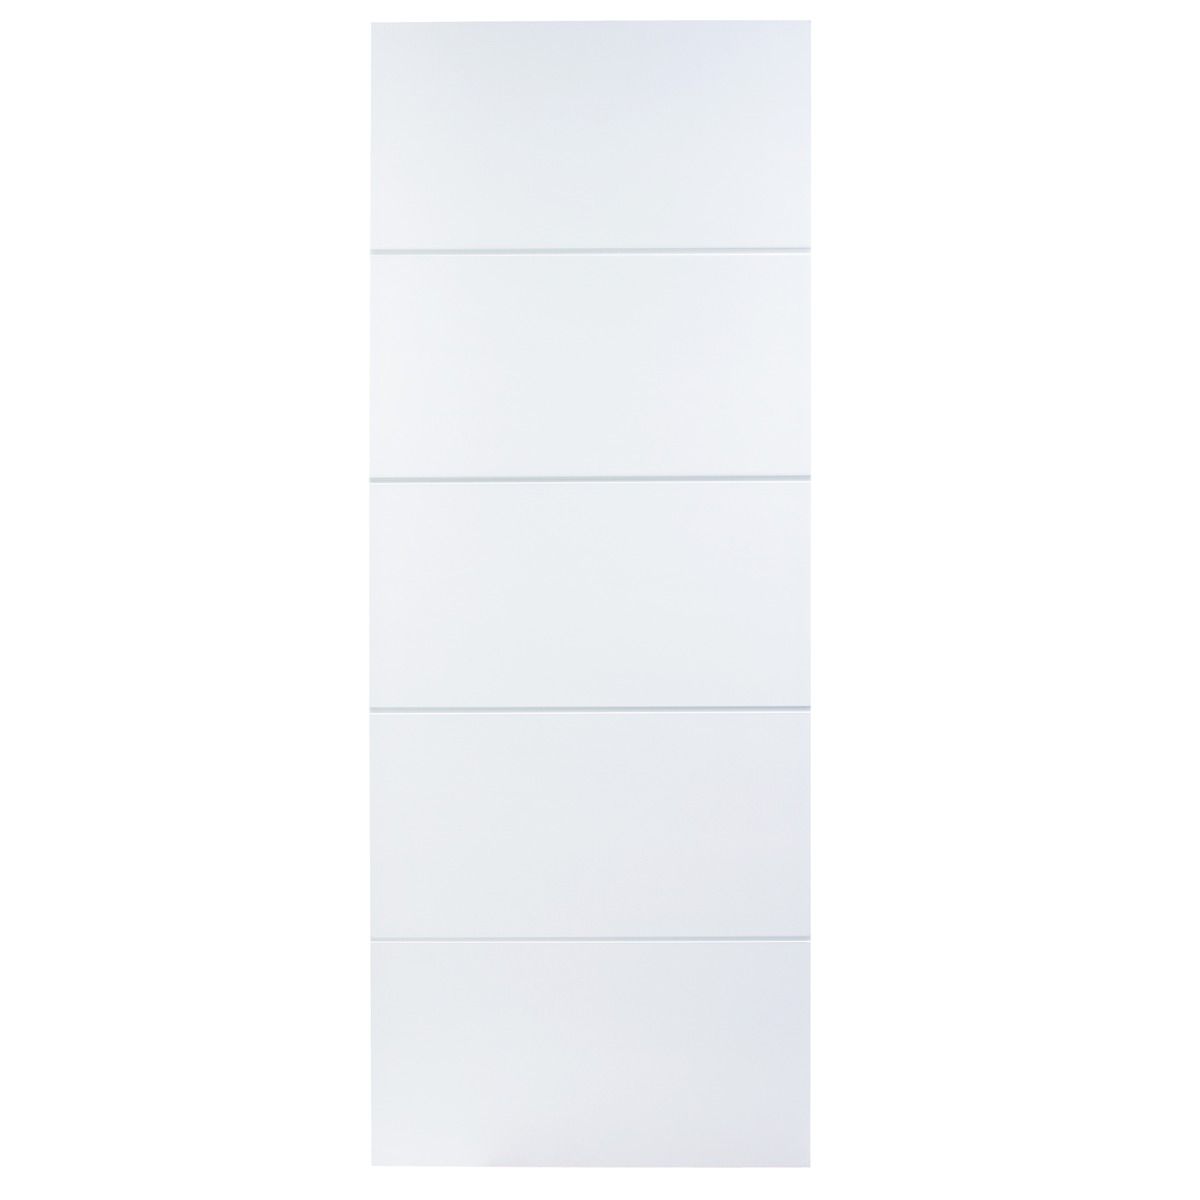 Wickes Halifax White Smooth Moulded Primed 5 Panel Internal Fire Door - 1981mm